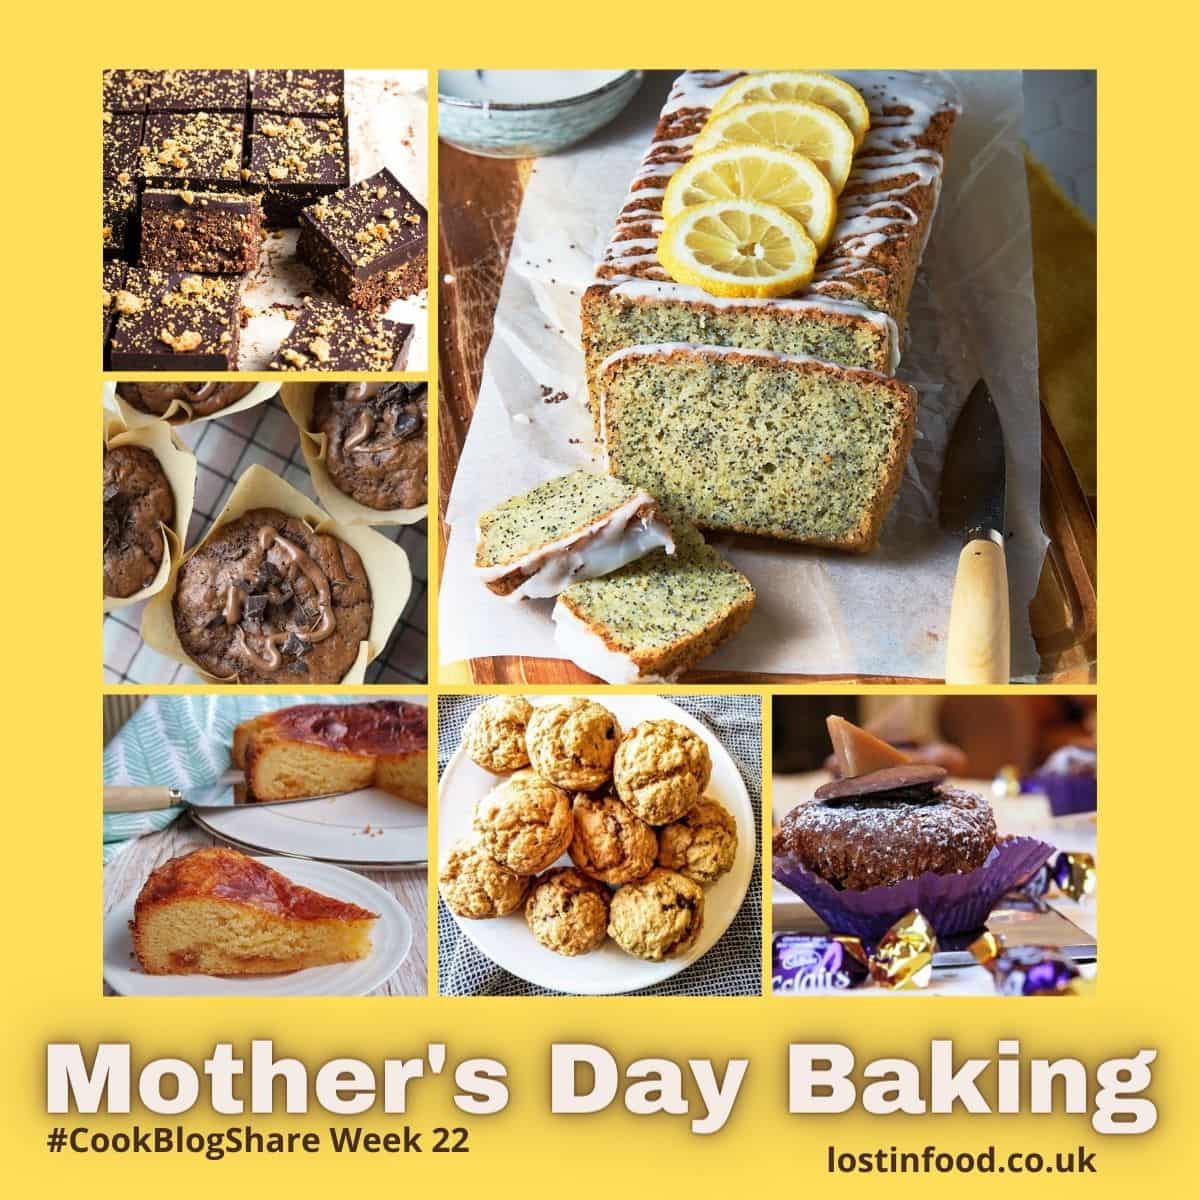 A collage of baking recipes fit for Mothers Day Baking.